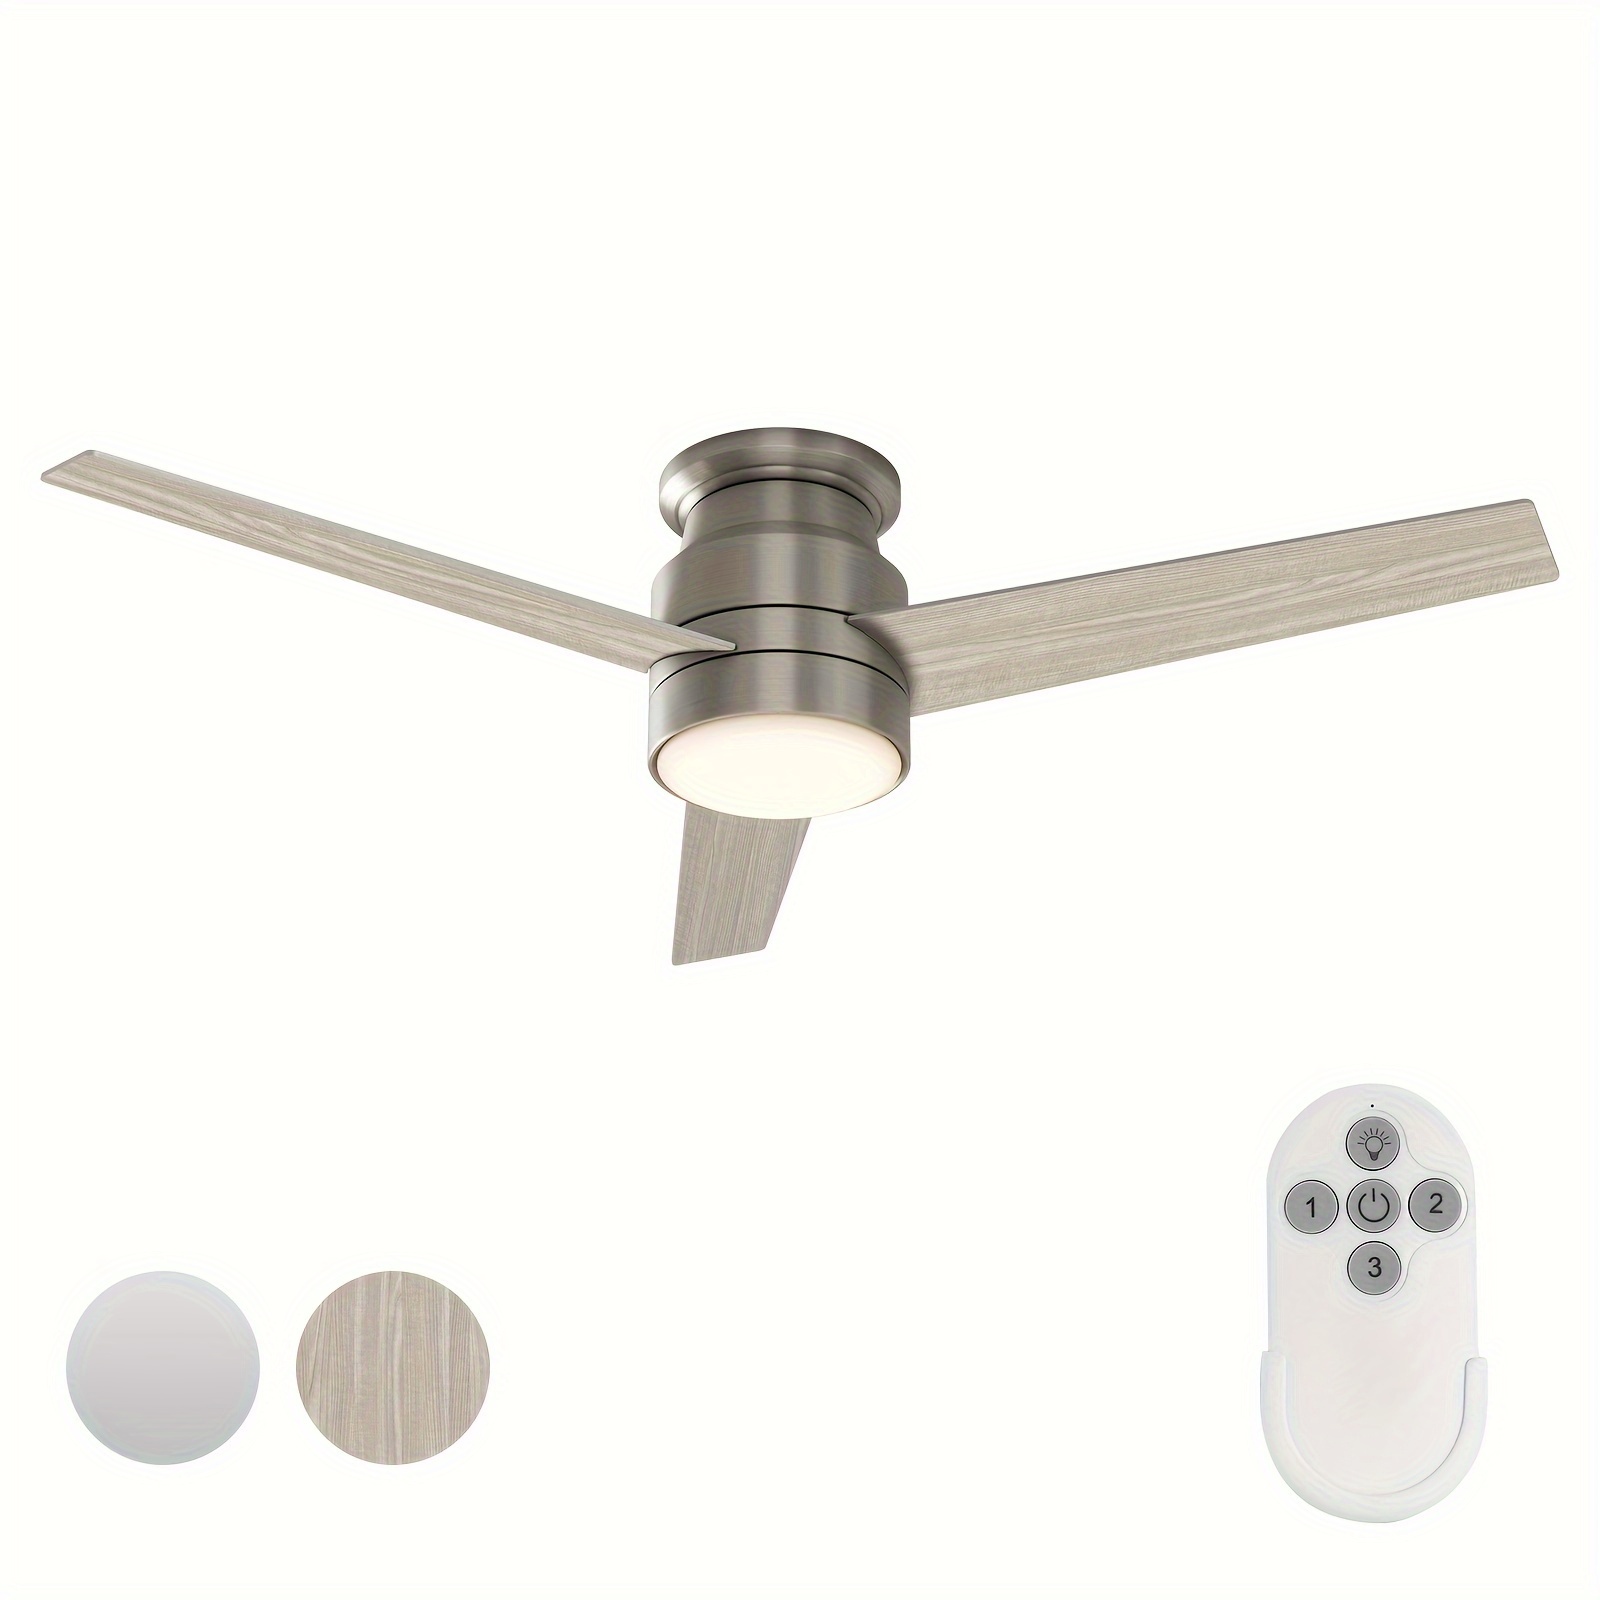 1pc embedded fan light with remote control adjustable 3000k color temperature led light source 3 speed wind glass lampshade 3 double sided color wooden fan blades suitable for bedroom living room basement kitchen dining room 52 inches details 1